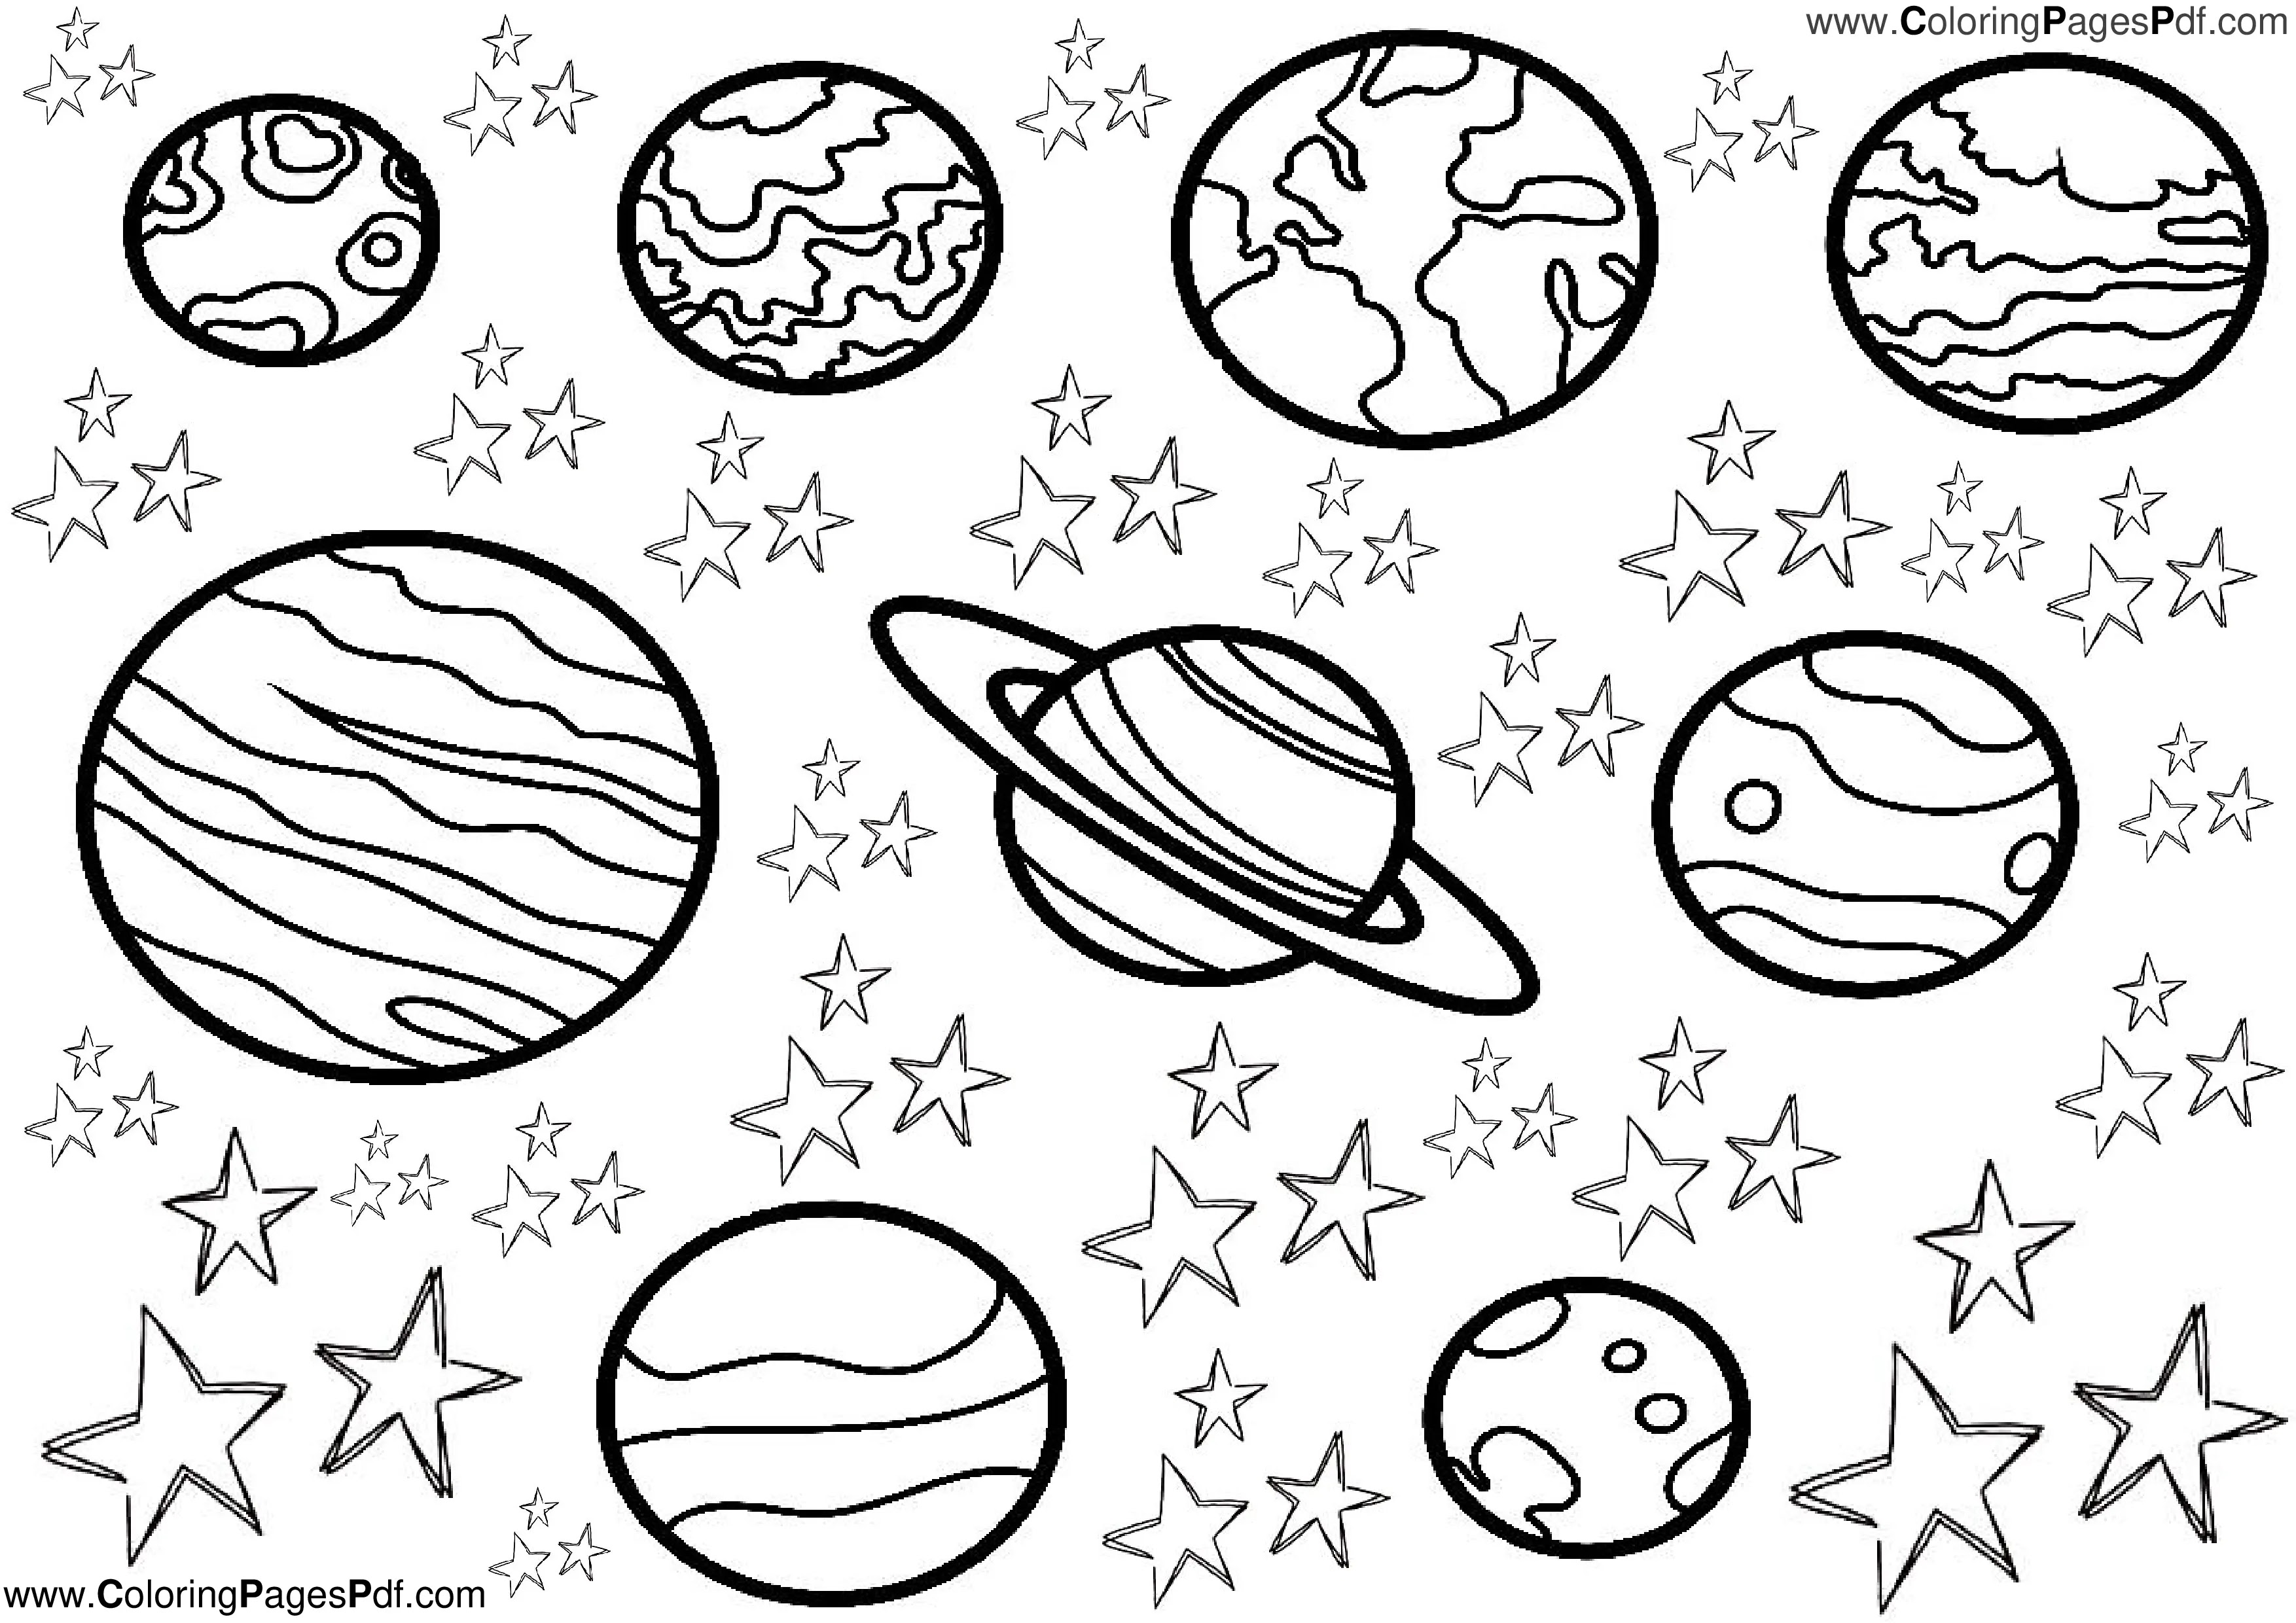 Dwarf planets coloring pages